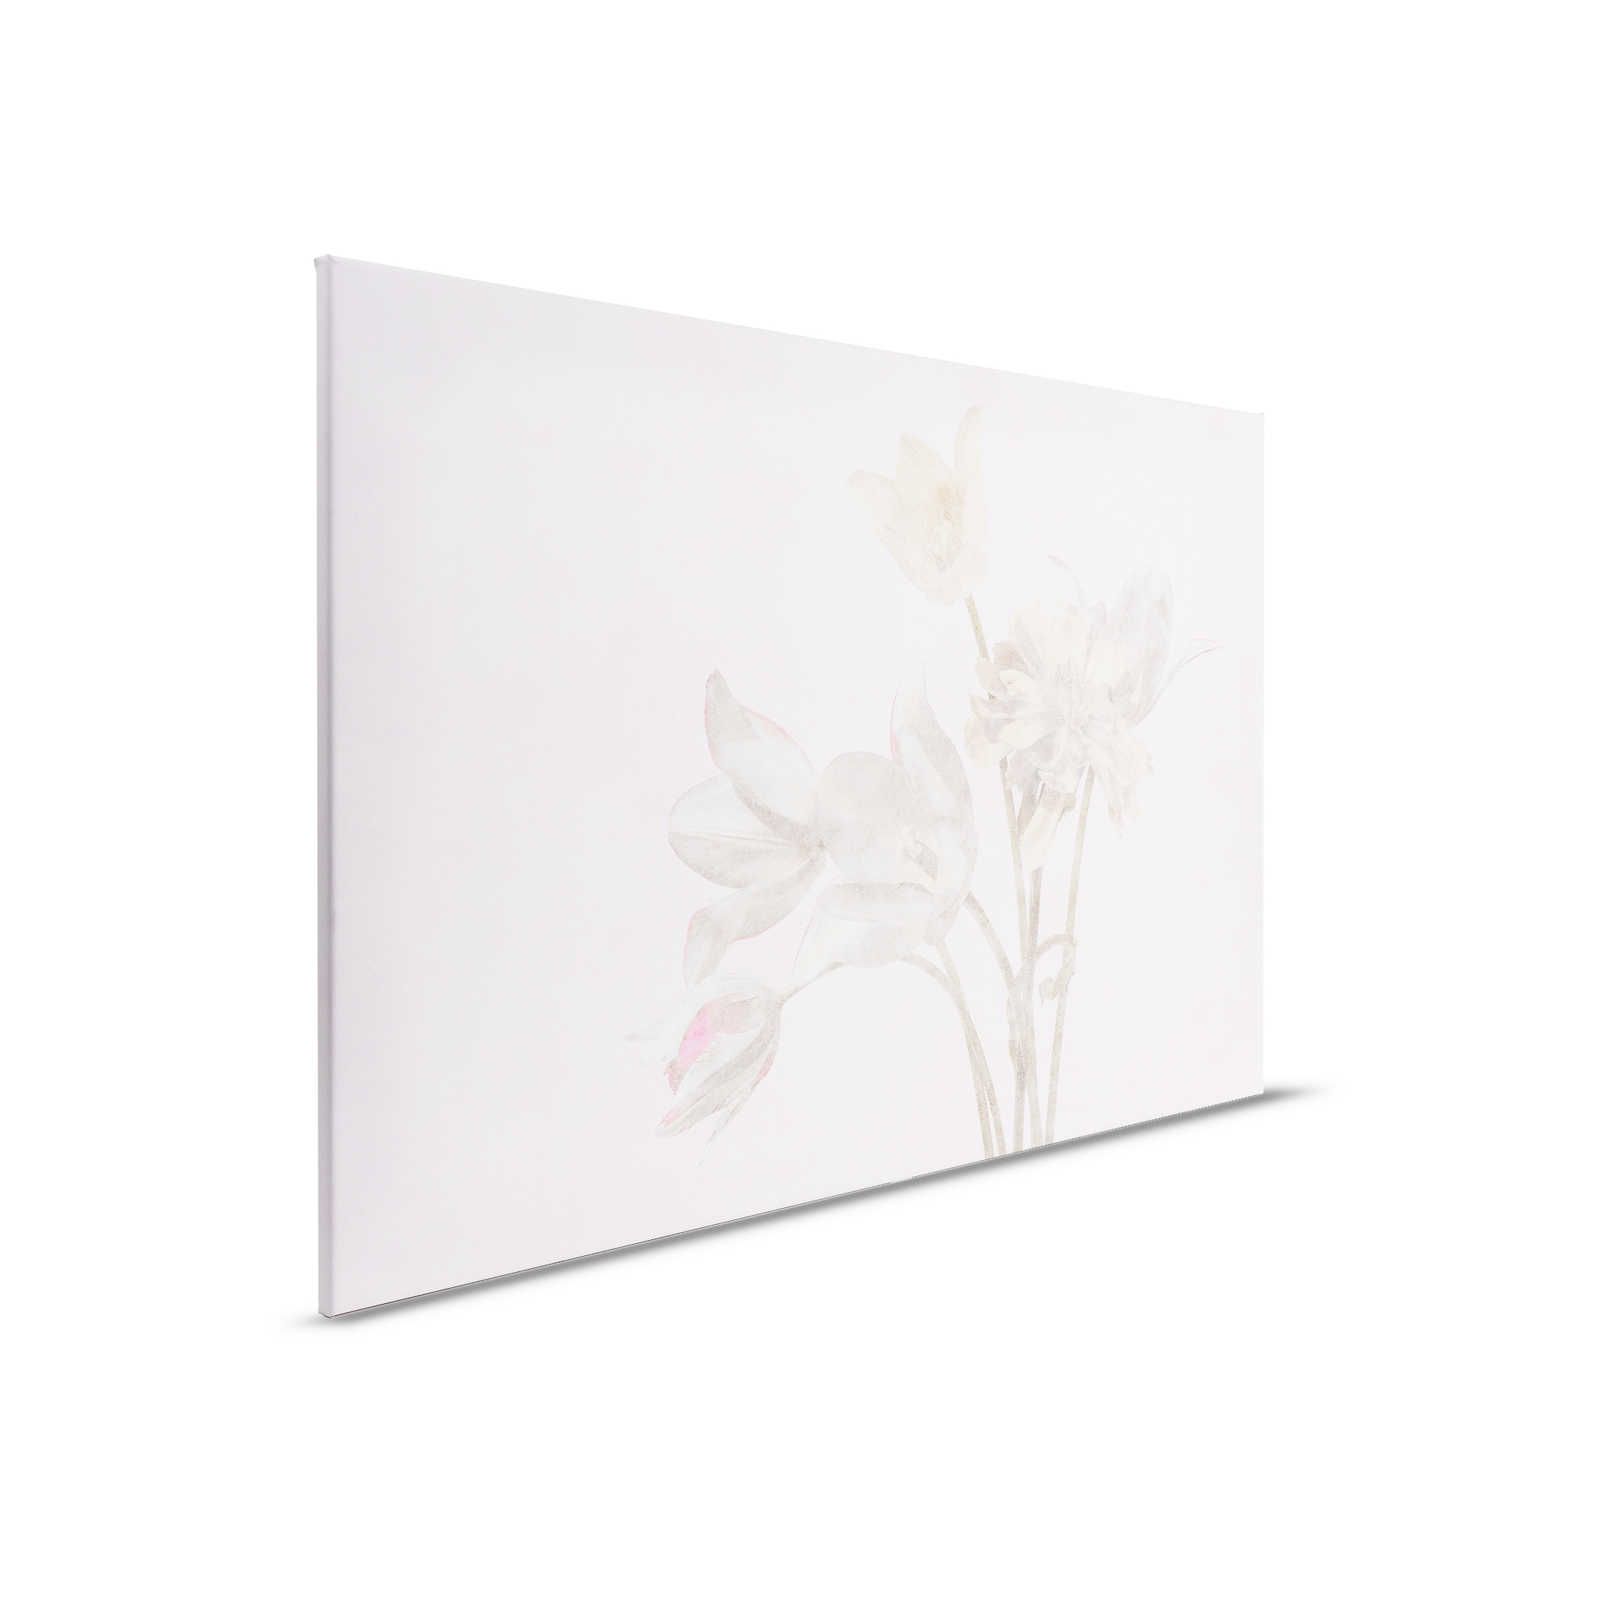 Morning Room 1 - Flowers Faded Style Canvas Painting - 0.90 m x 0.60 m
